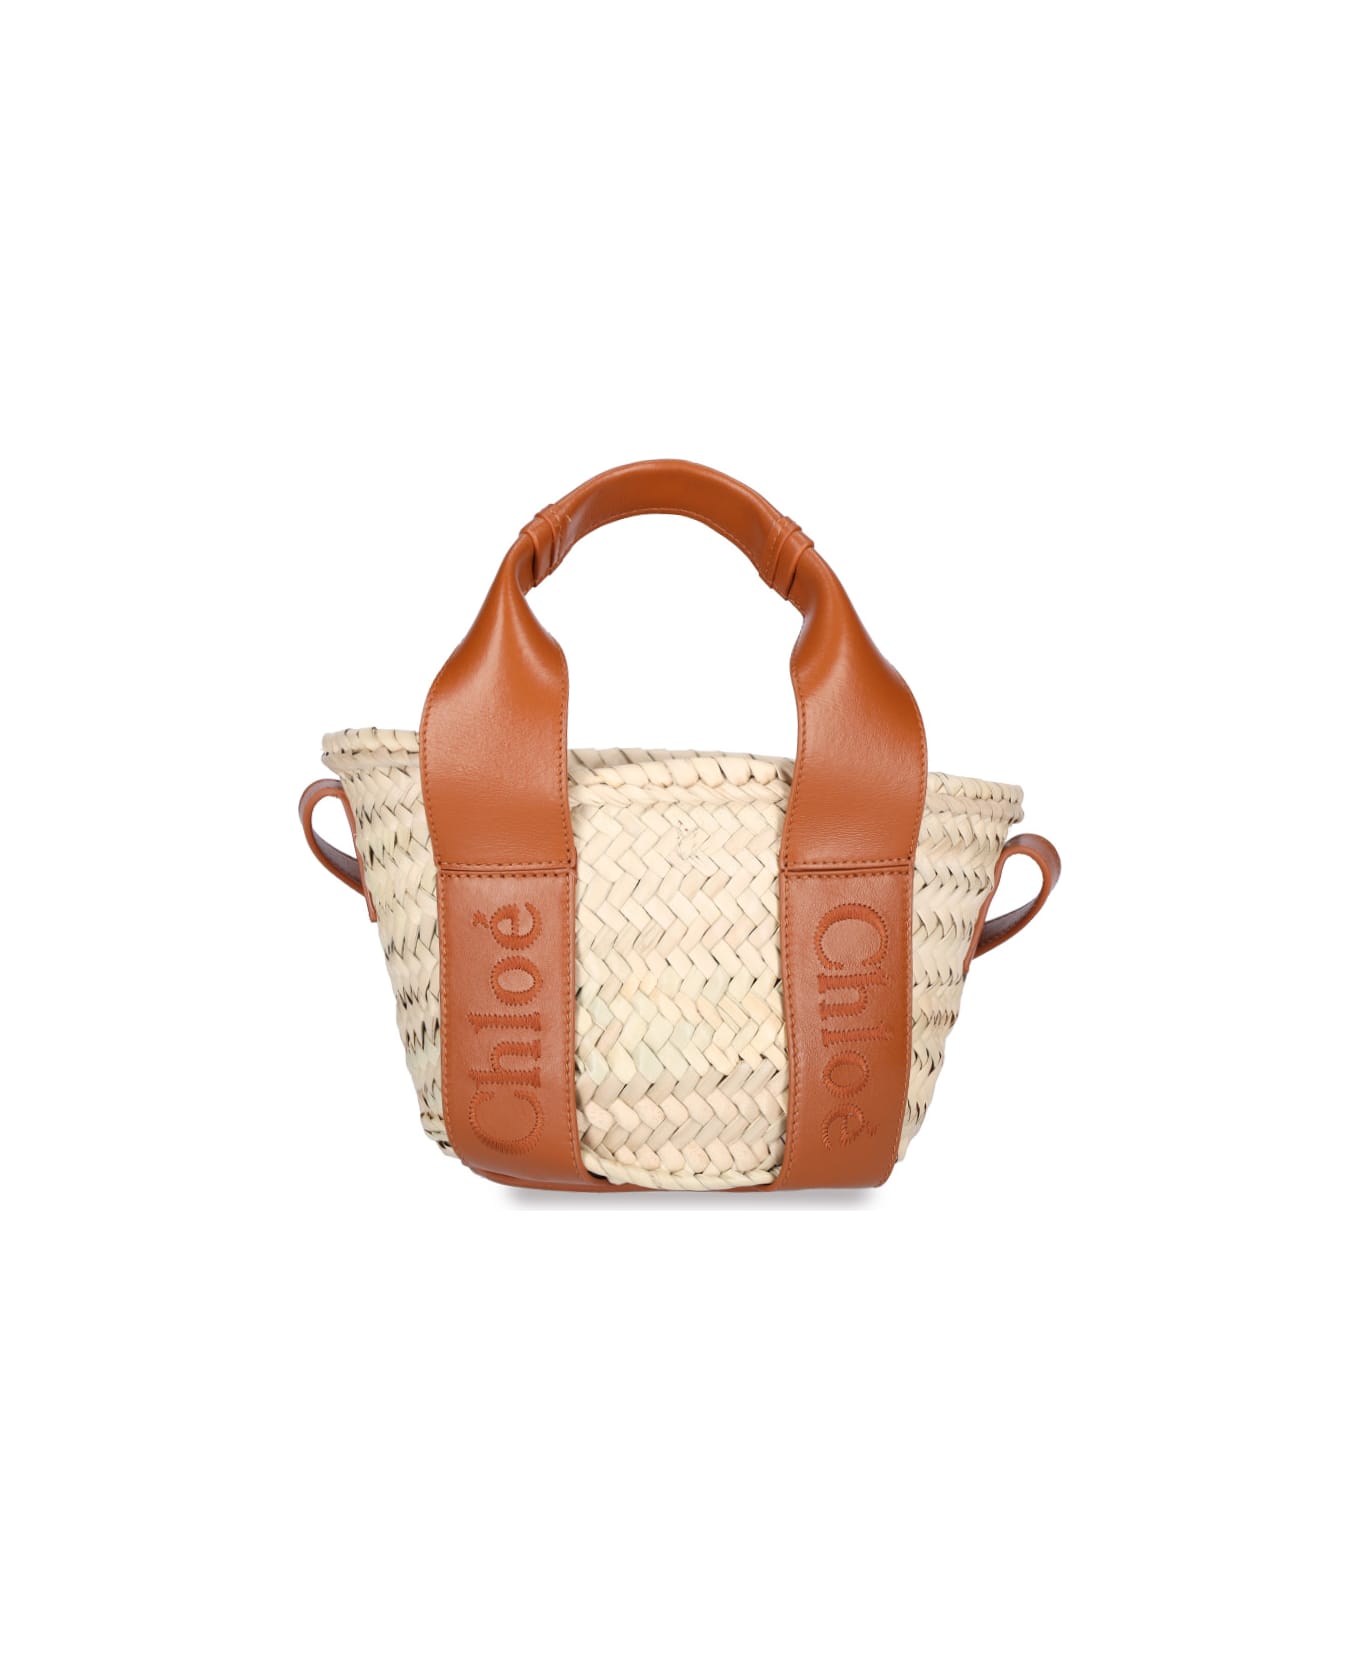 Chloé Sense Small Tote Bag In Nat Raffia And Brown Leather - Brown